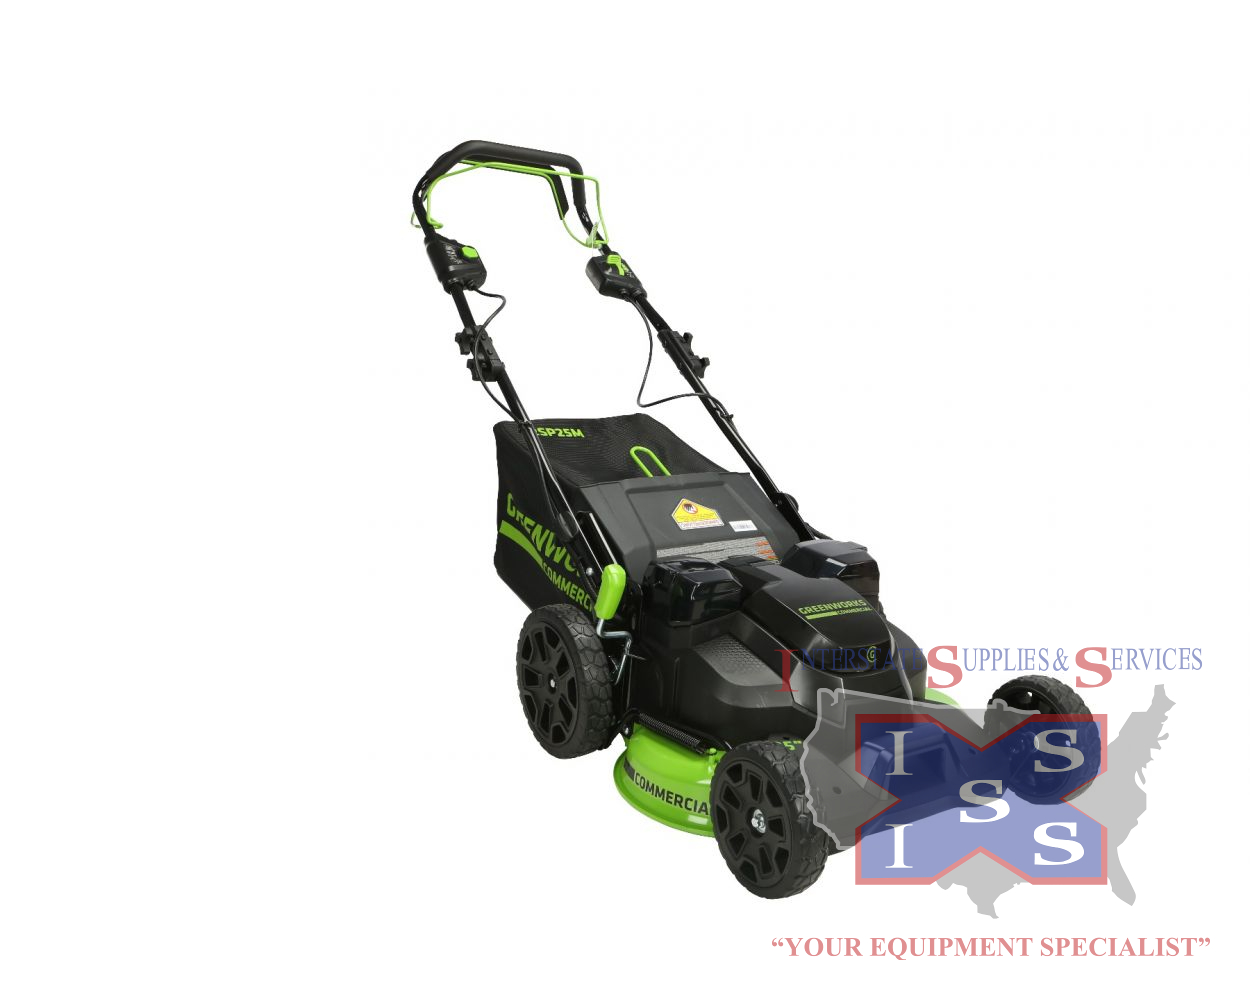 82LM25S 82-Volt 25" Self-Propelled Lawn Mower (Tool Only)